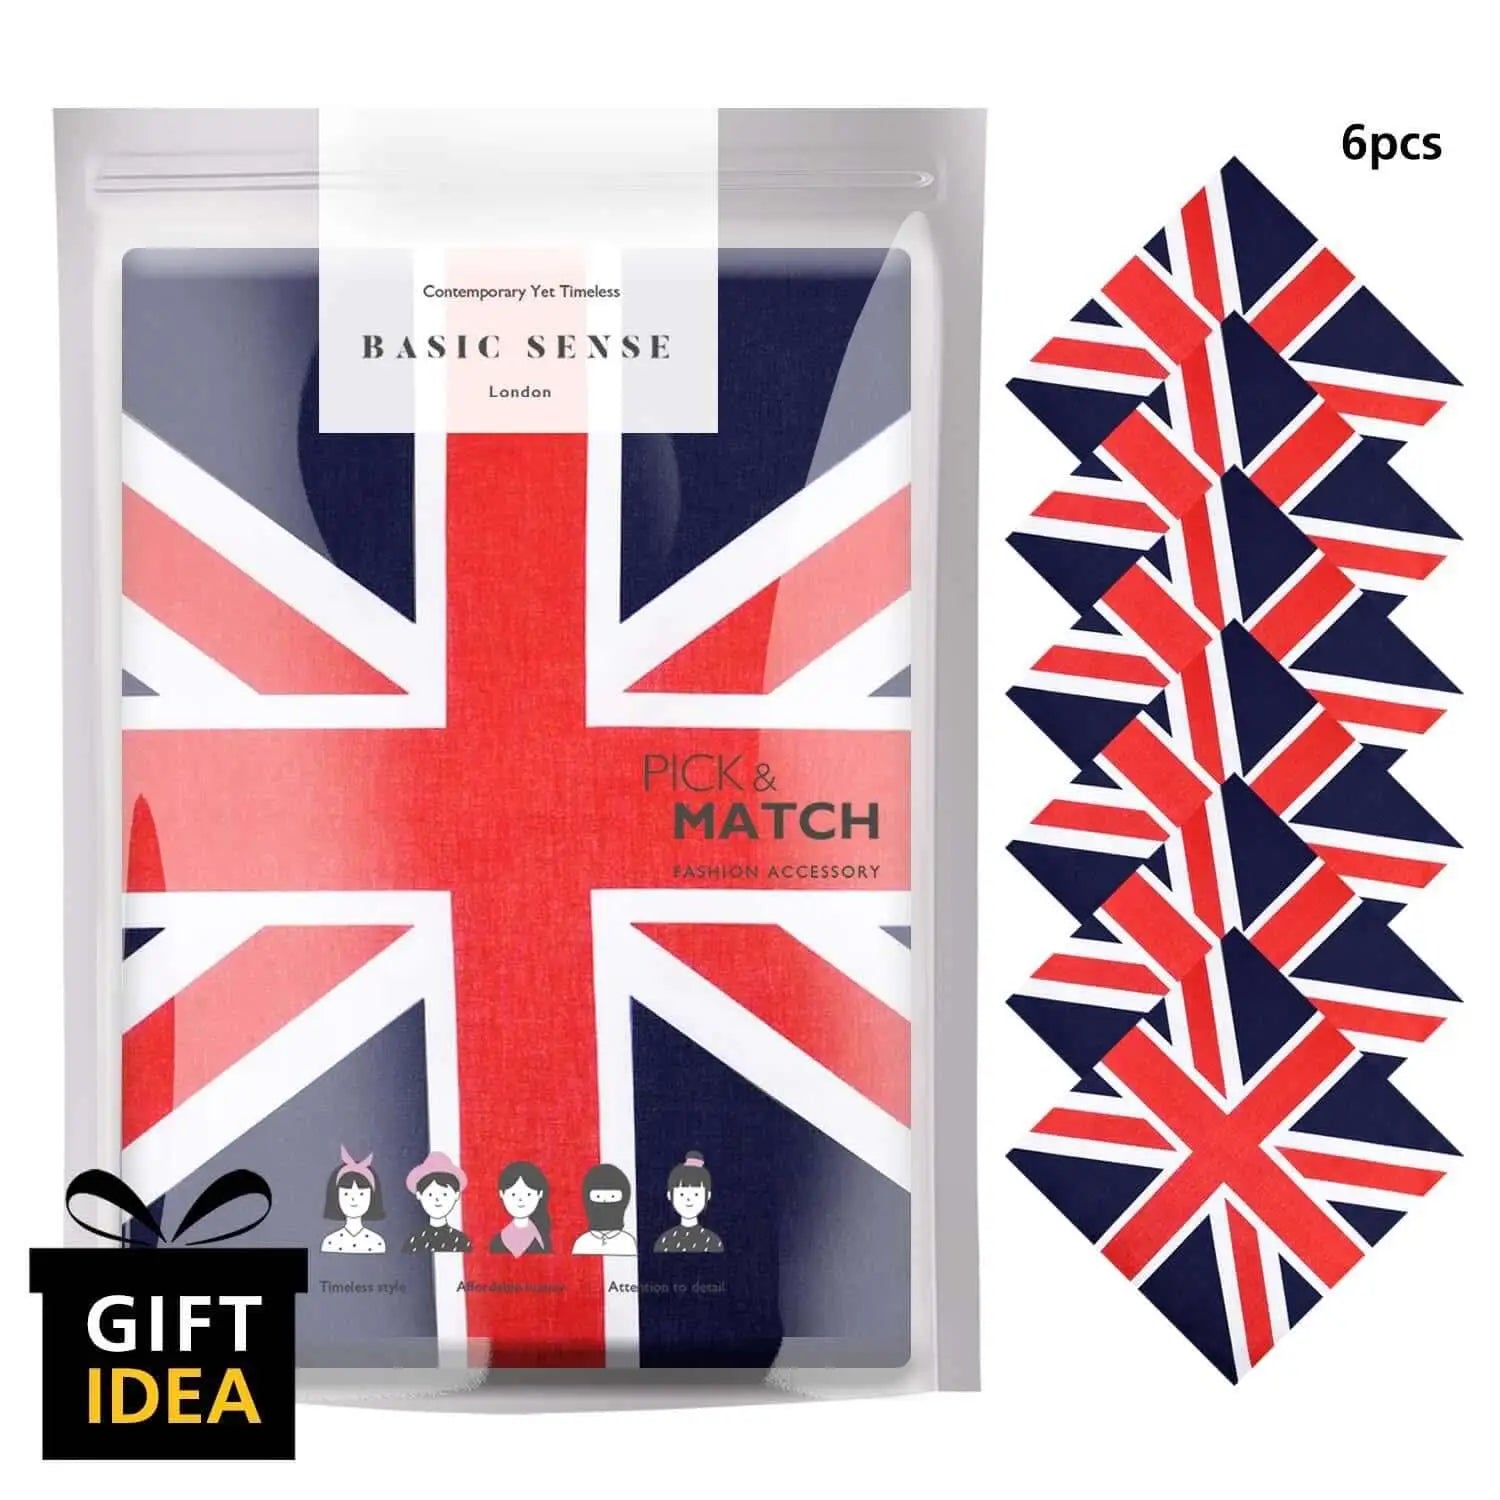 Union Jack flag fabric bag with white and red design